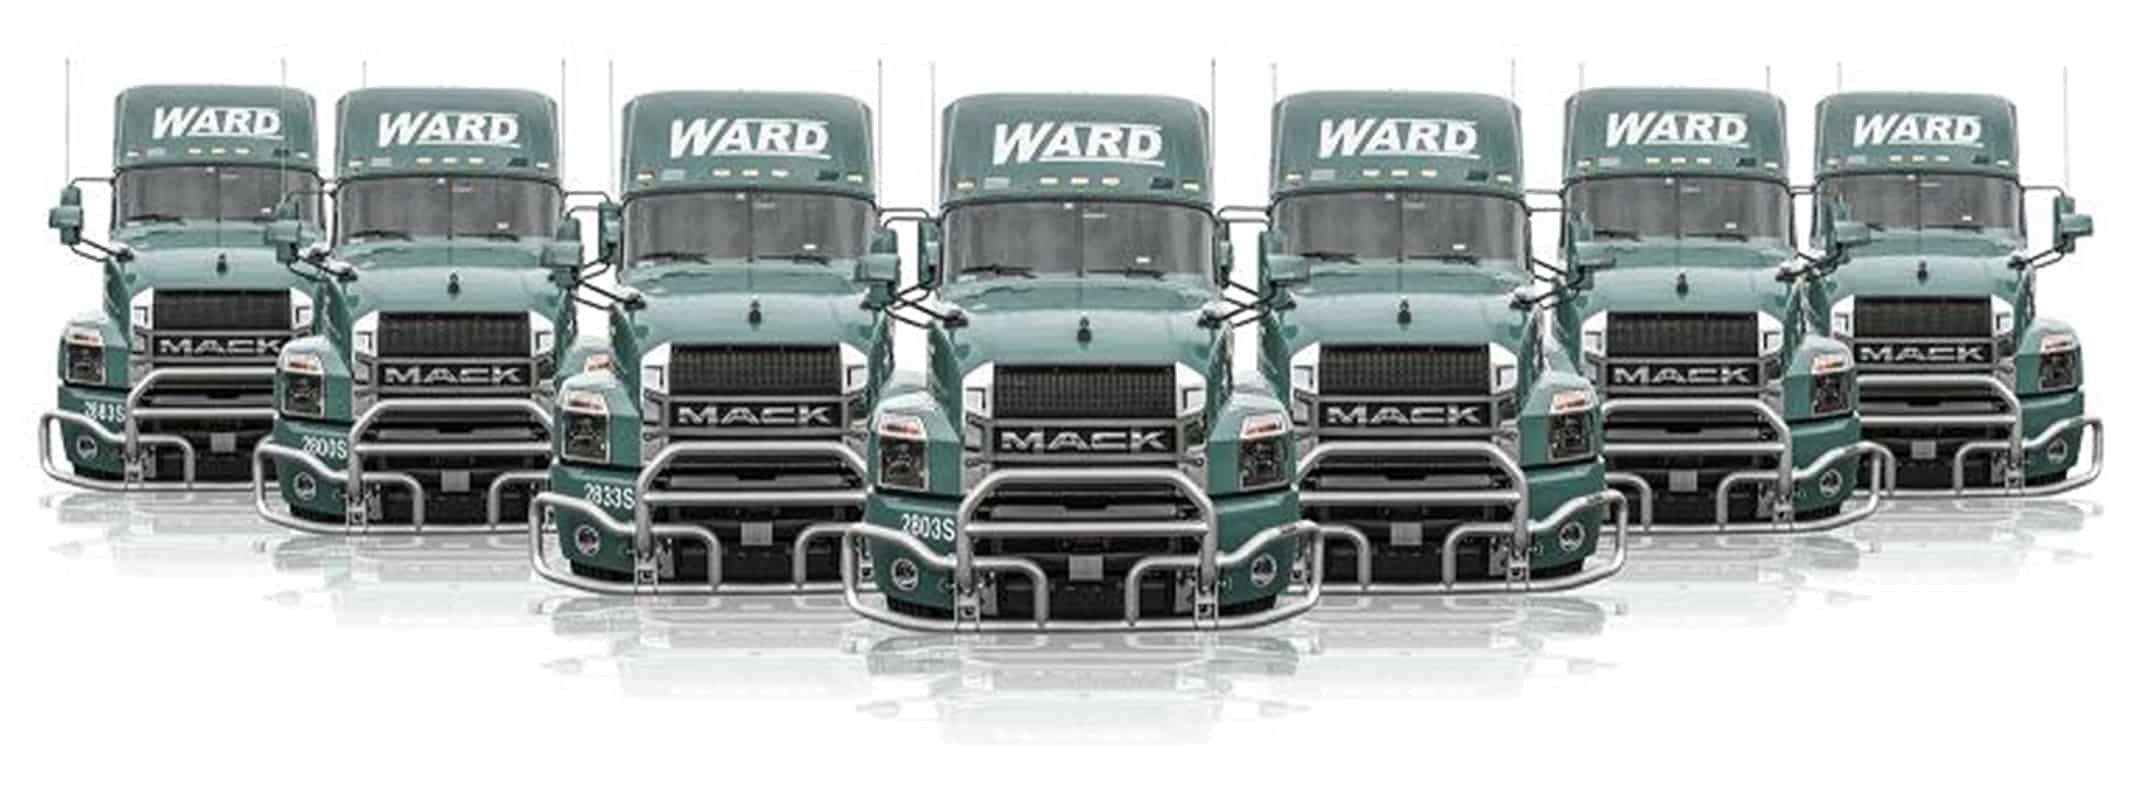 Ward Equipment - line of Mack tractor trailers with Ward on Top